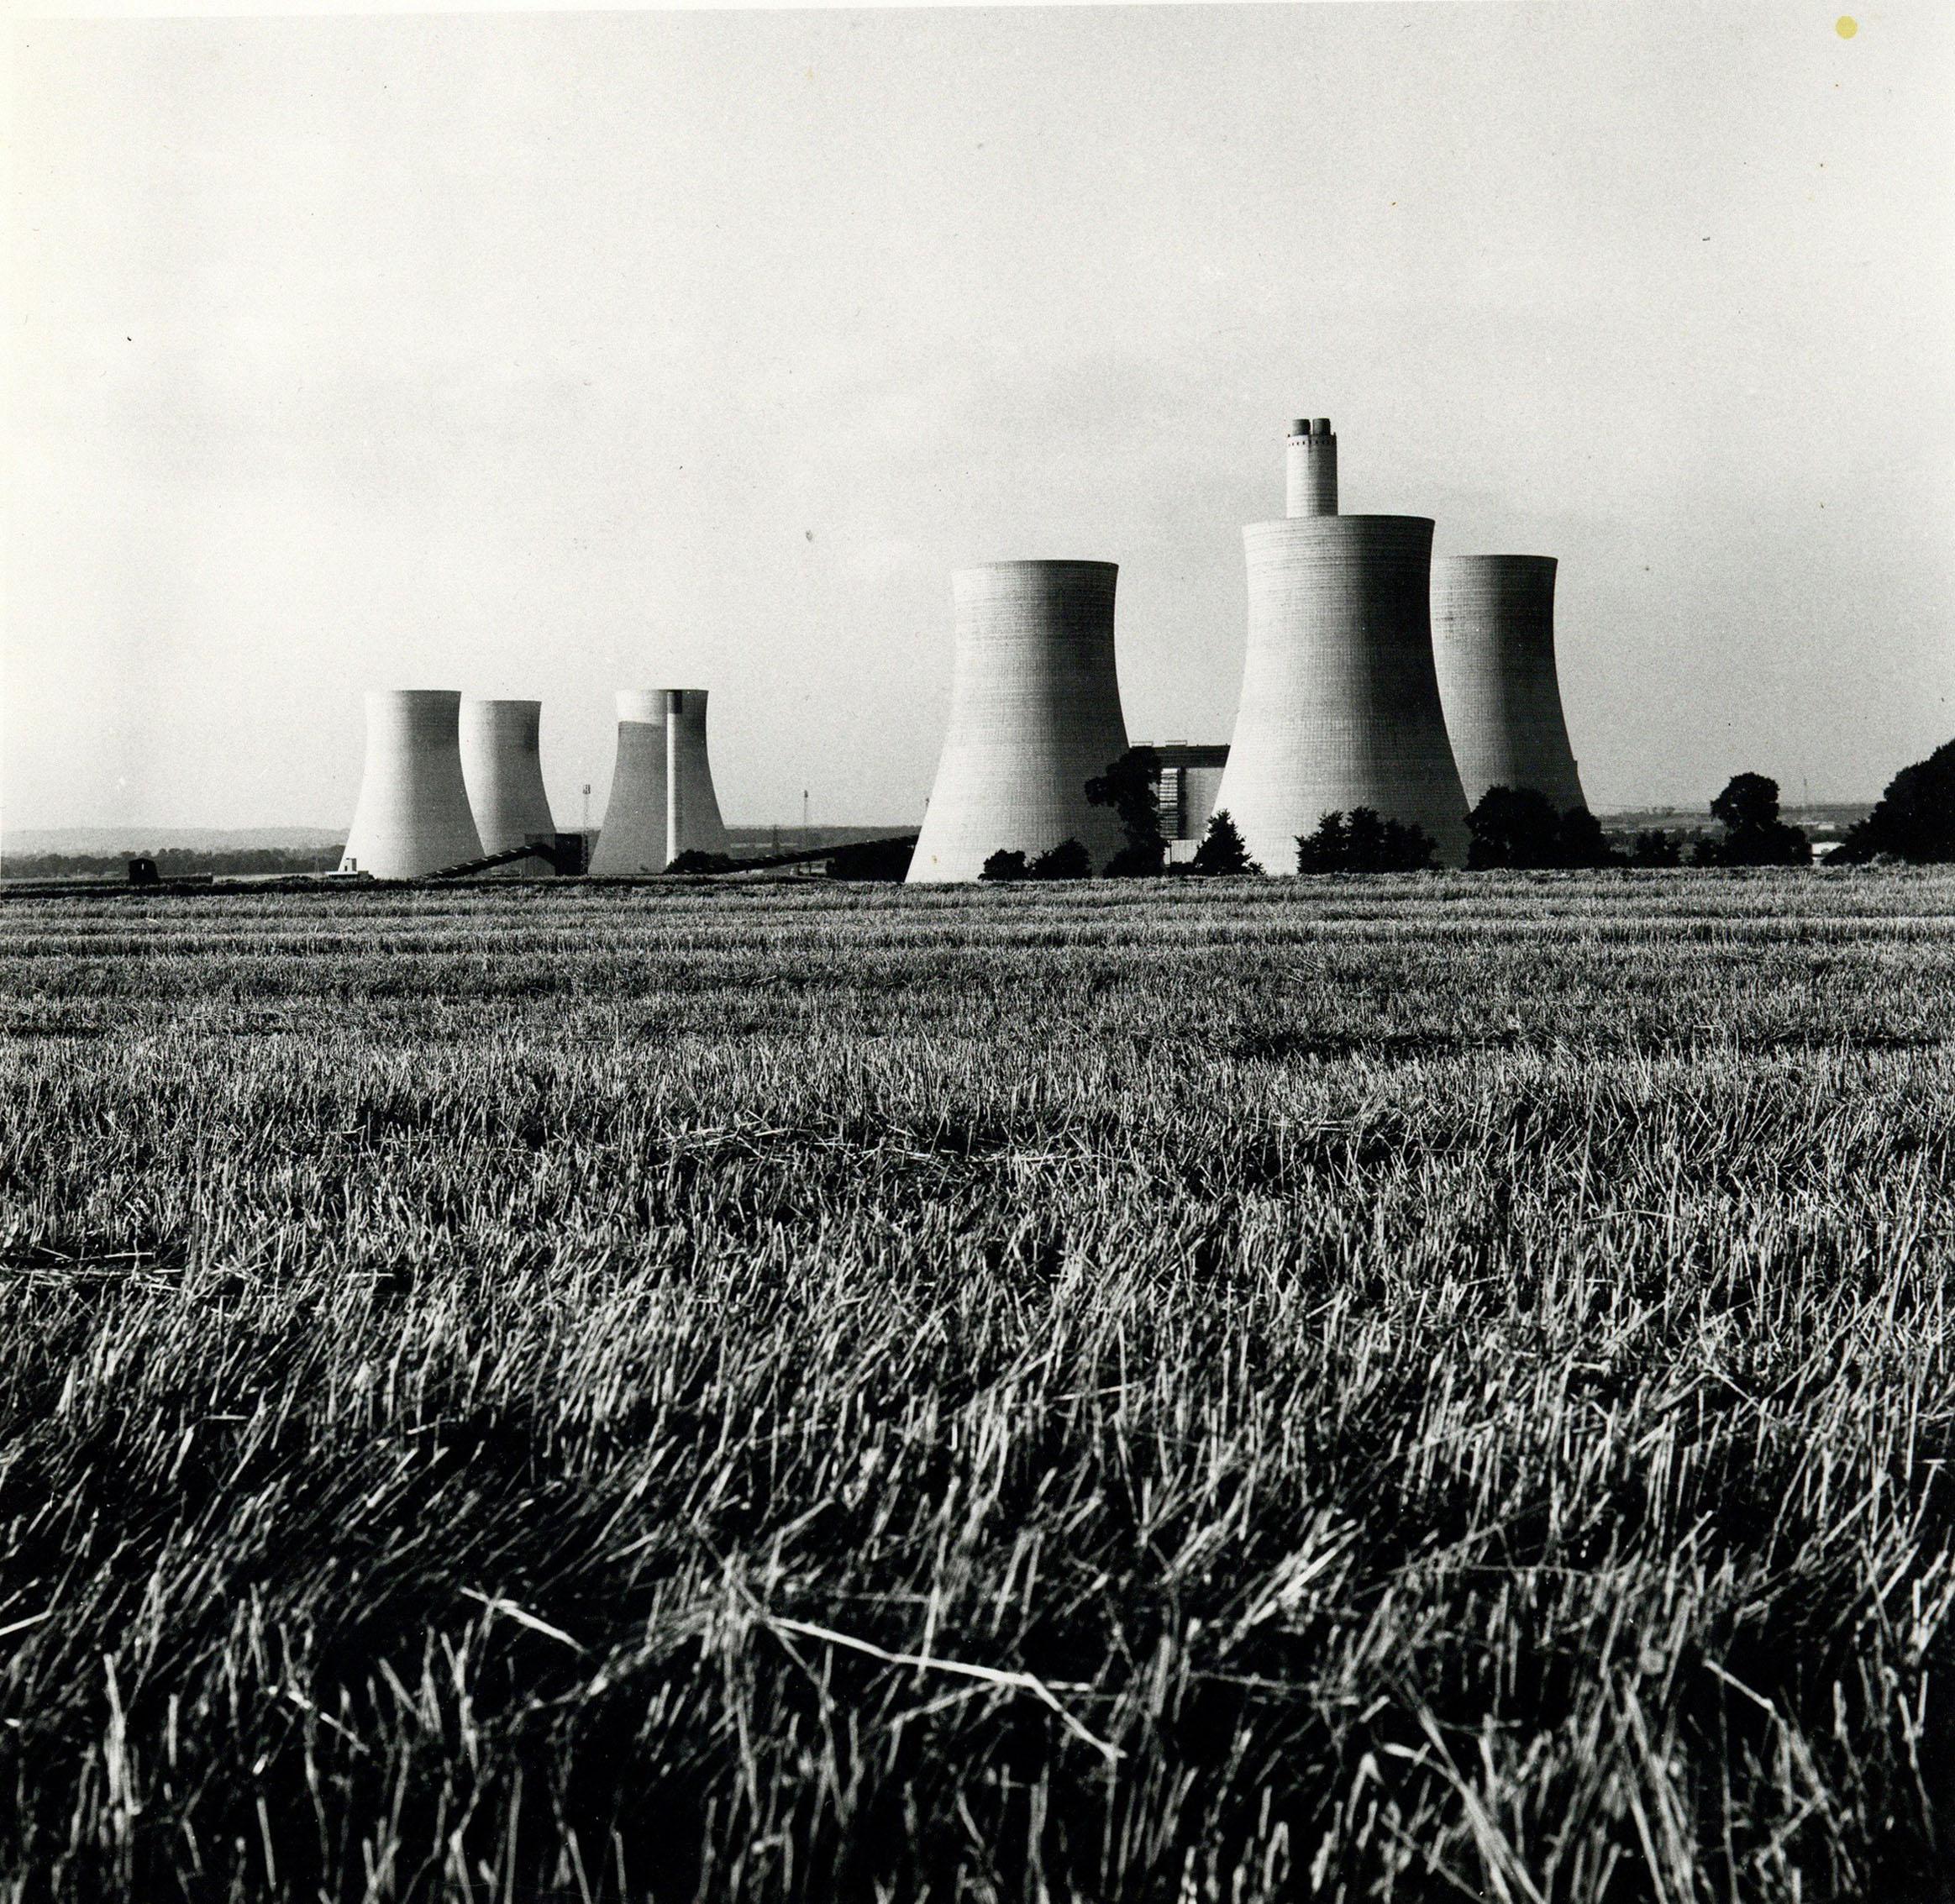 Rosemary Ellis Cooling Towers Silver Gelatin Photograph Print Surreal electric